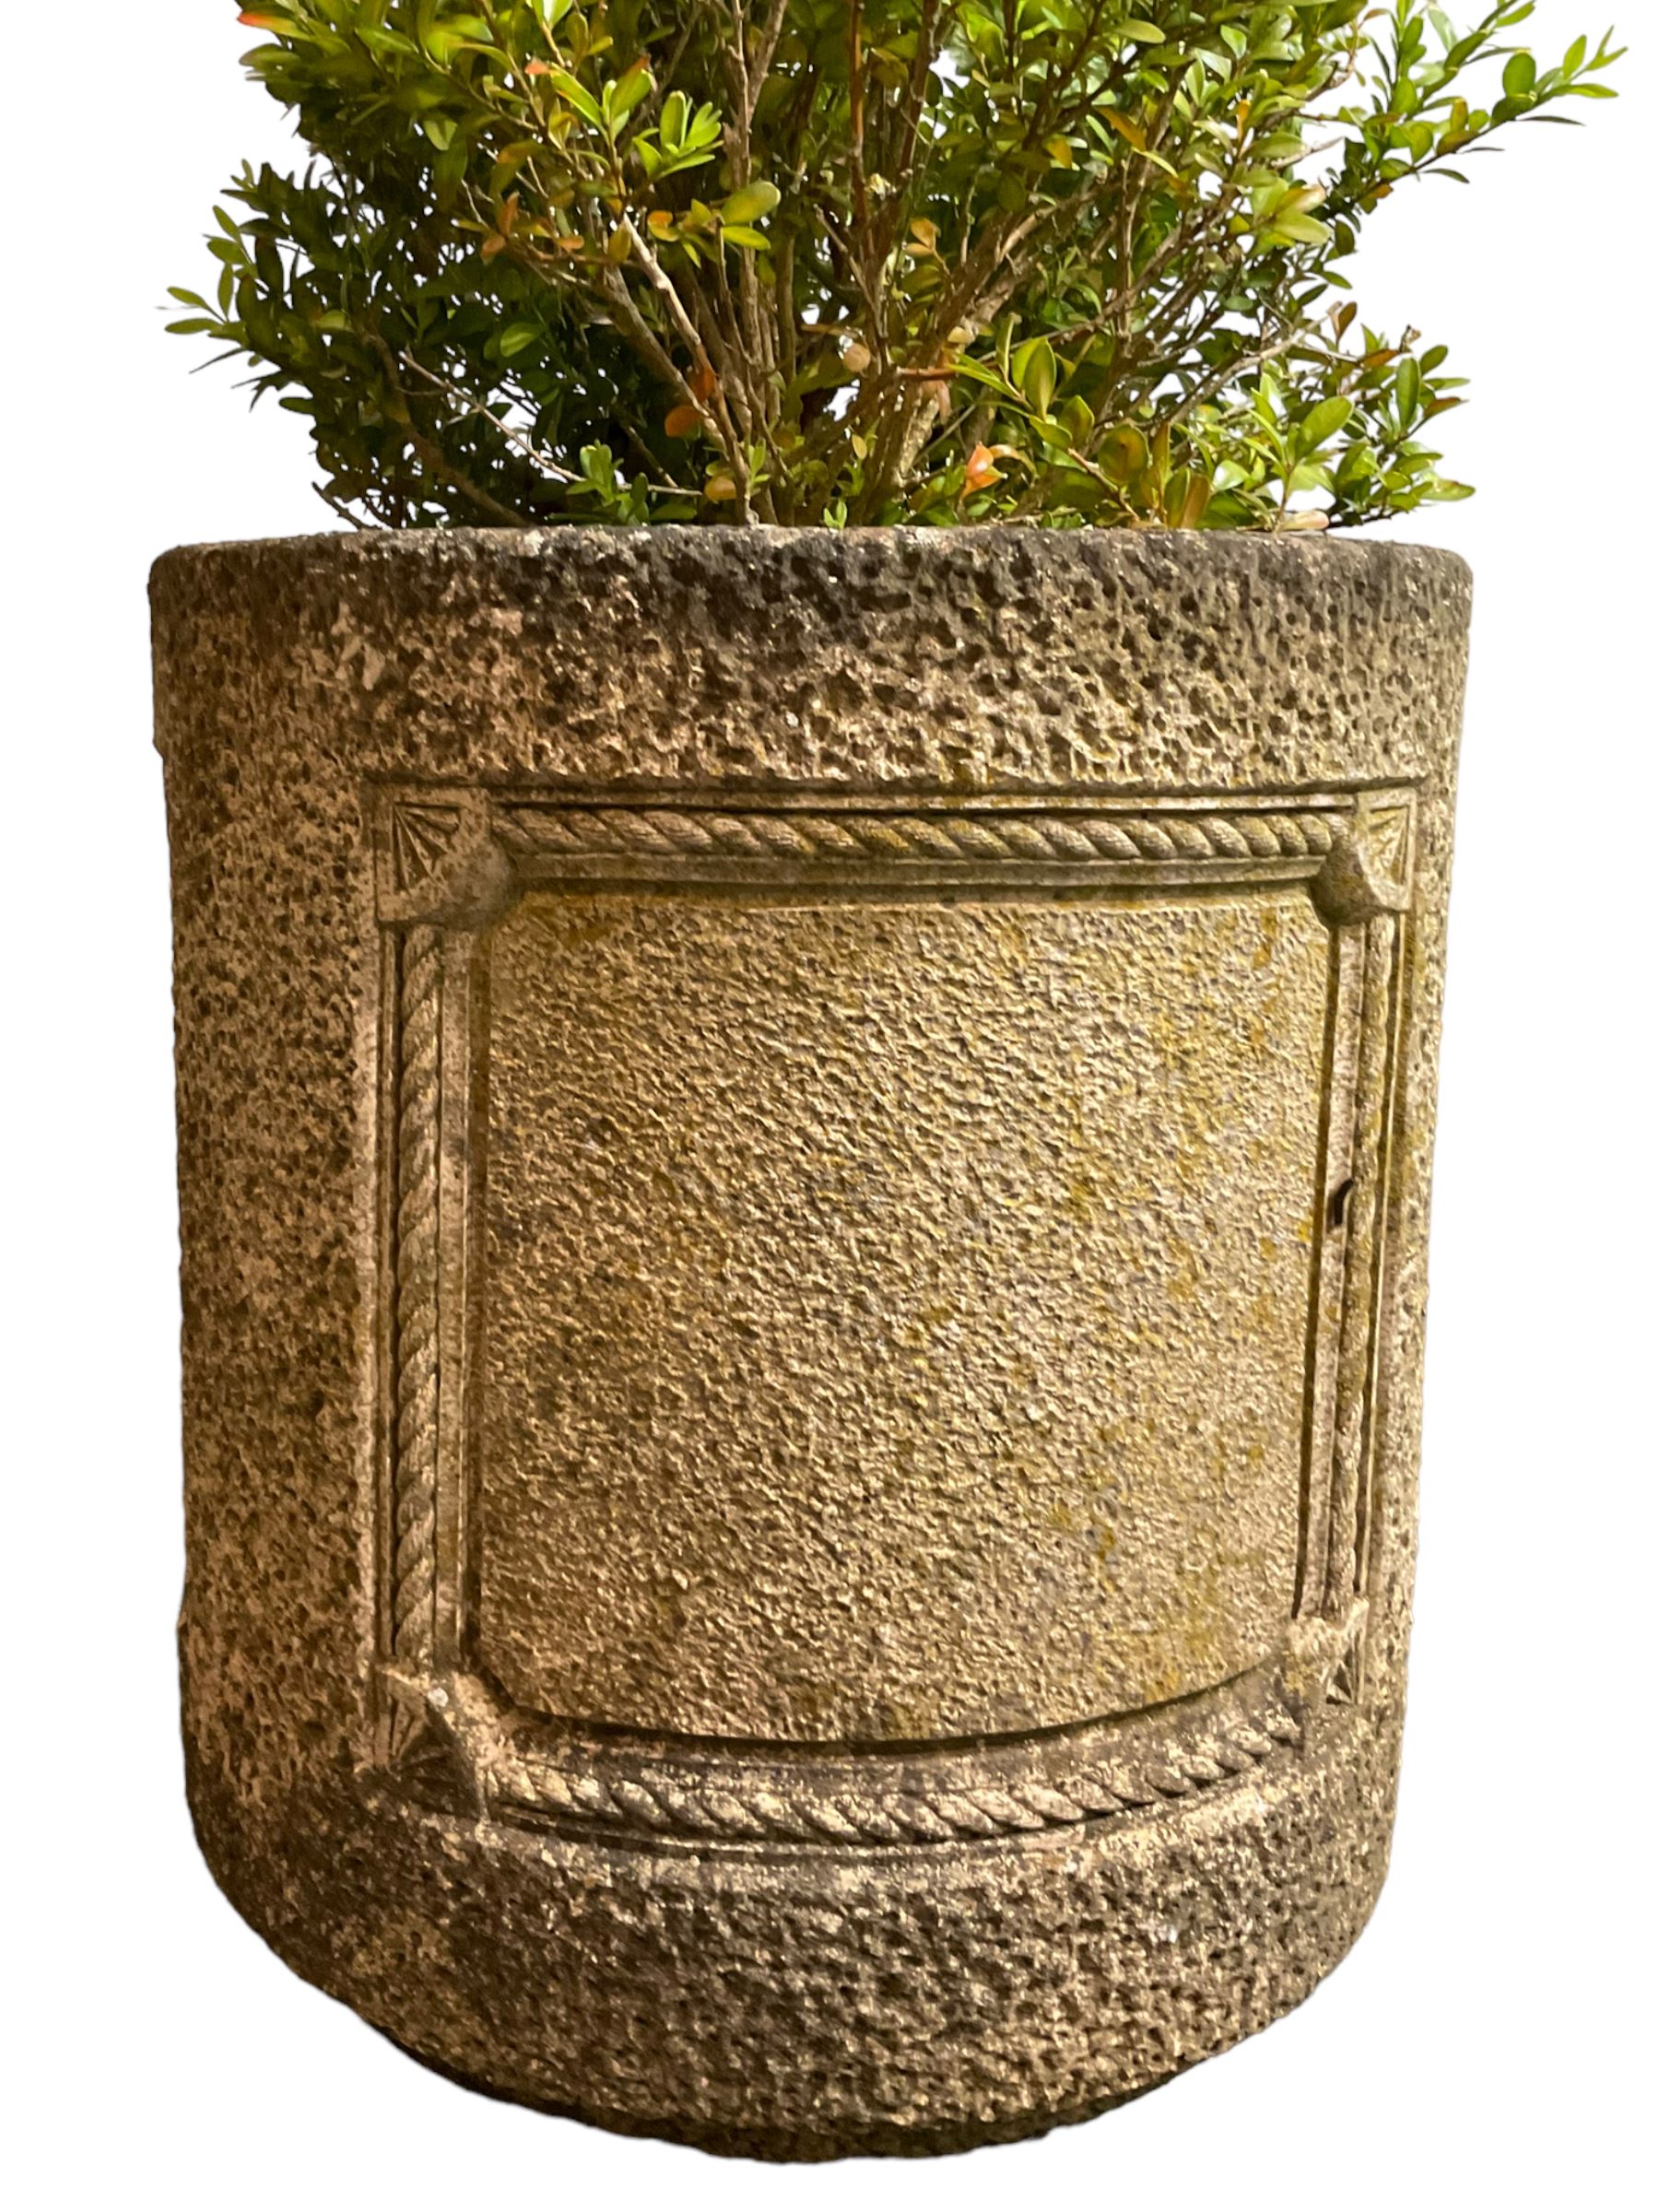 Pair of cast stone cylindrical planters - Image 5 of 5